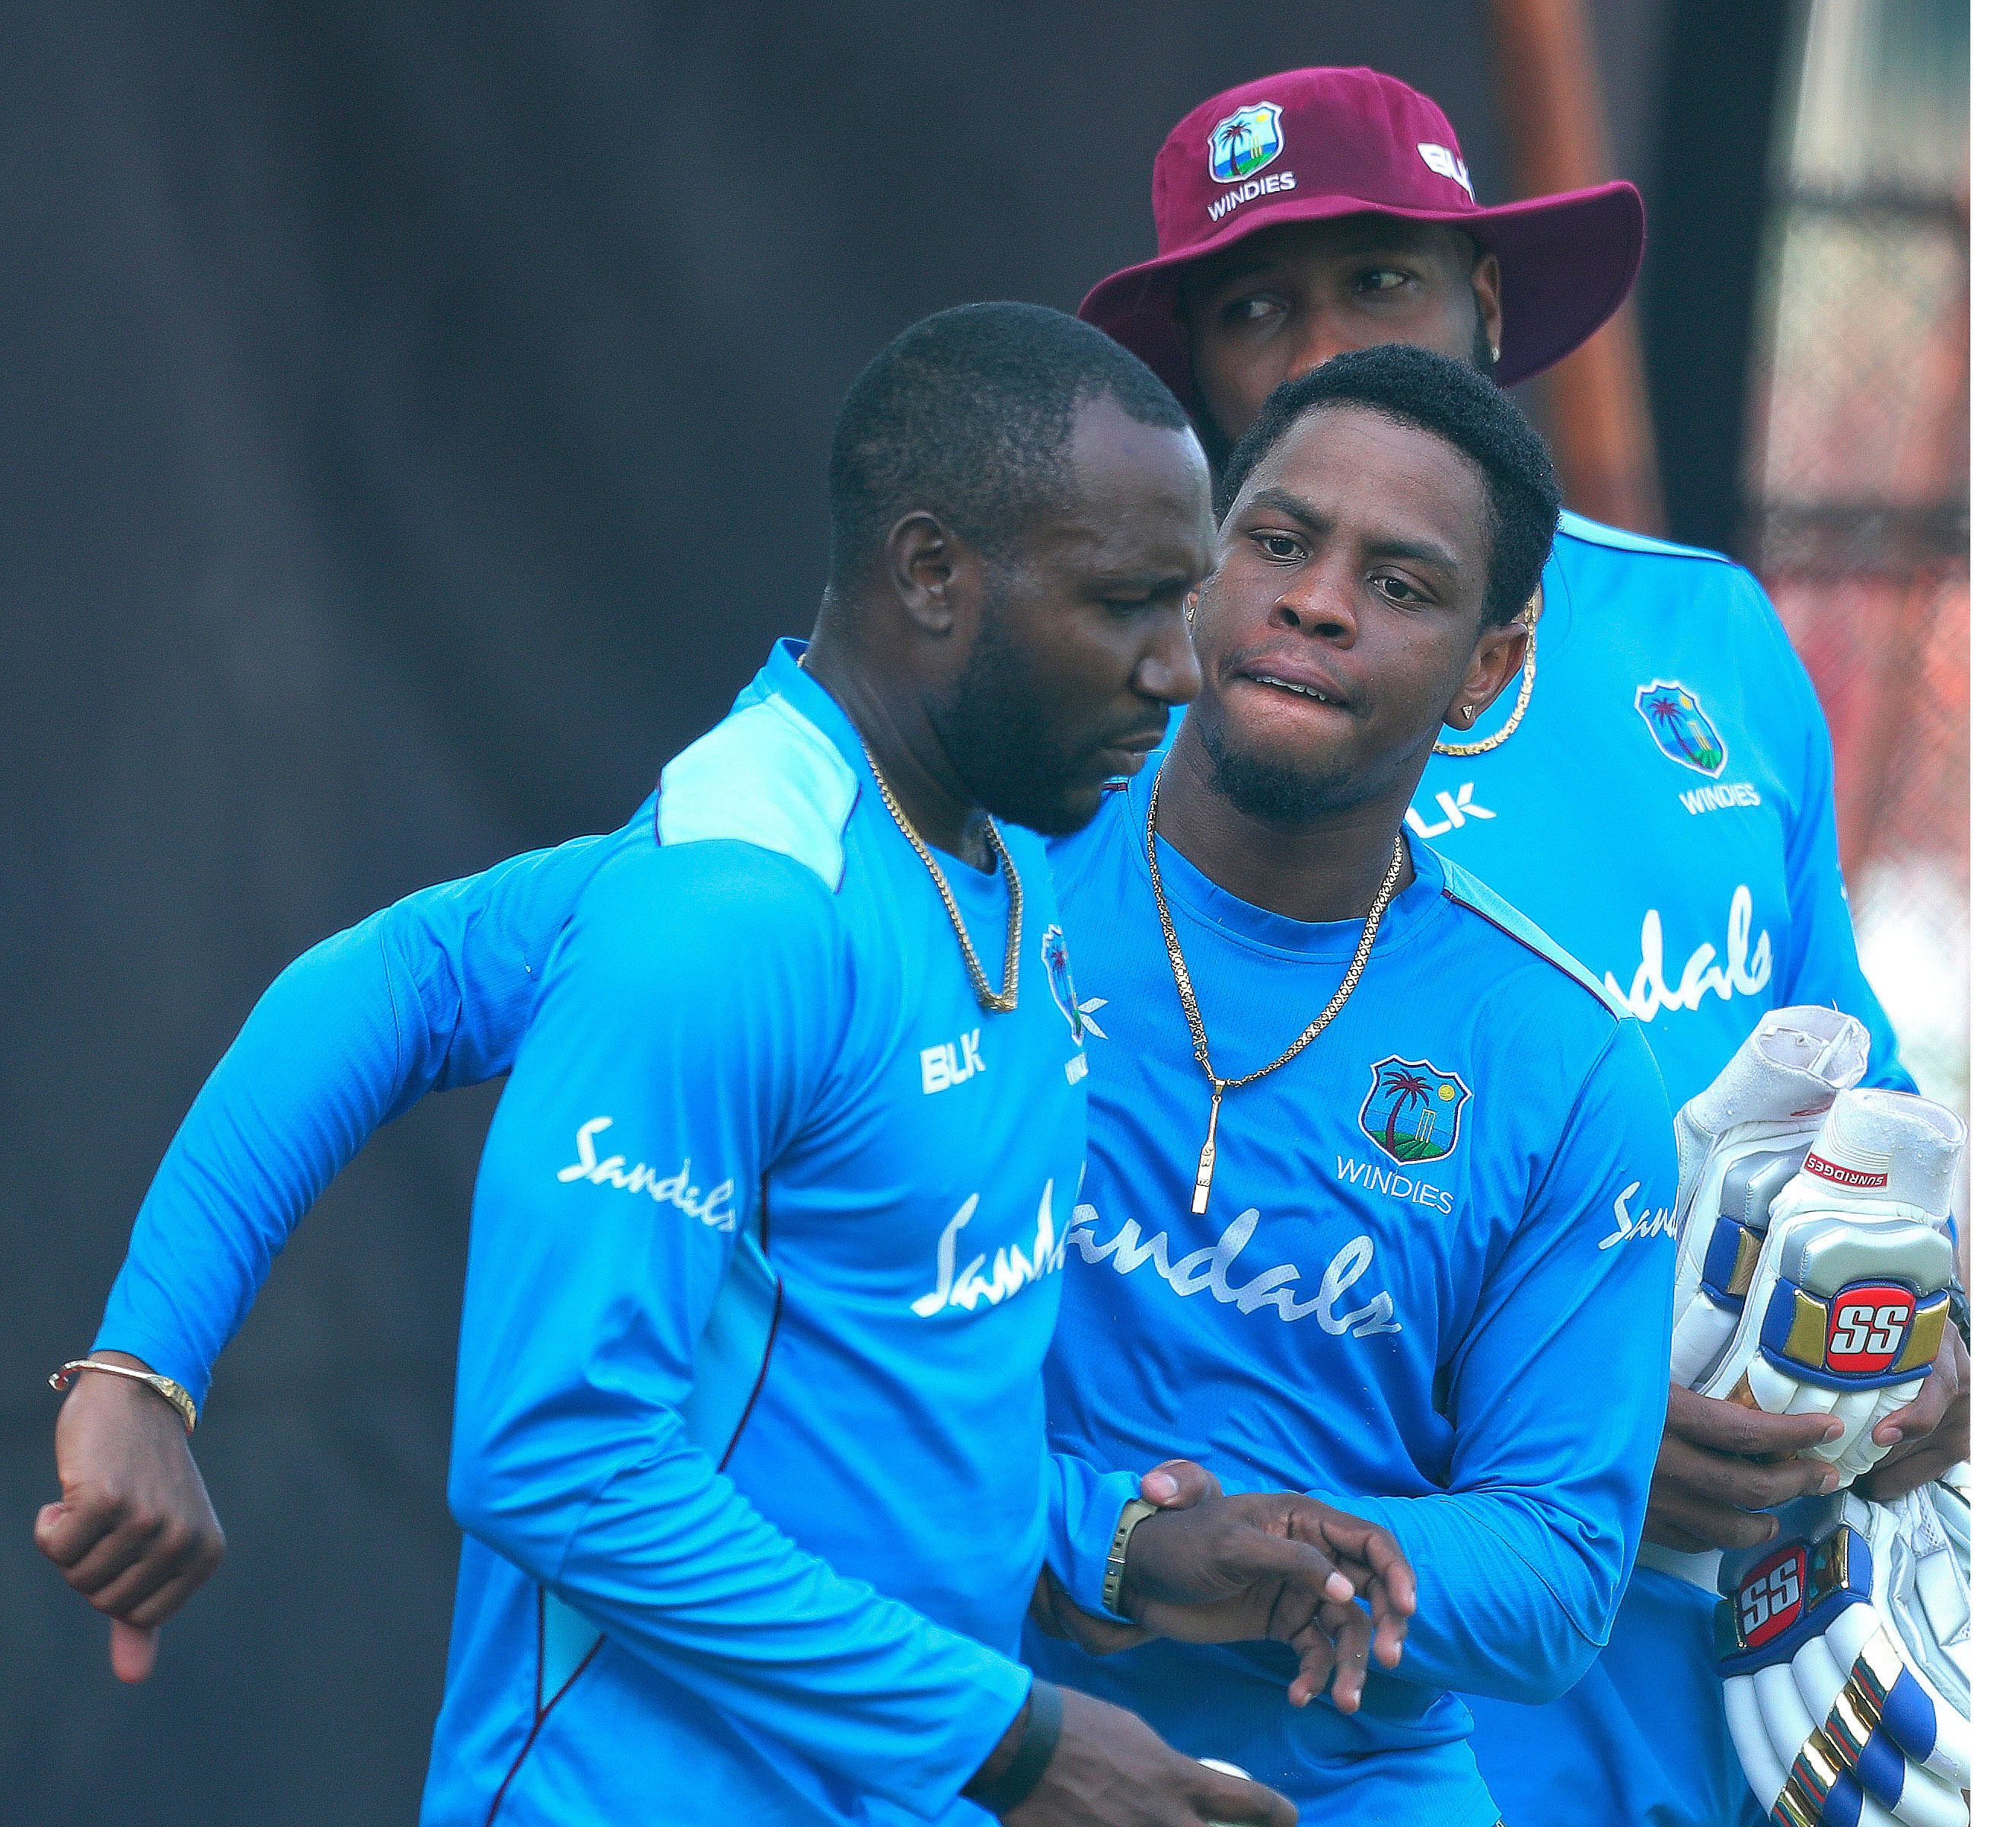 Shimron Hetmyer (right) and Kesrick Williams (left) attend a training session ahead of their first Twenty20 cricket match against India, in Hyderabad, on December 5, 2019.